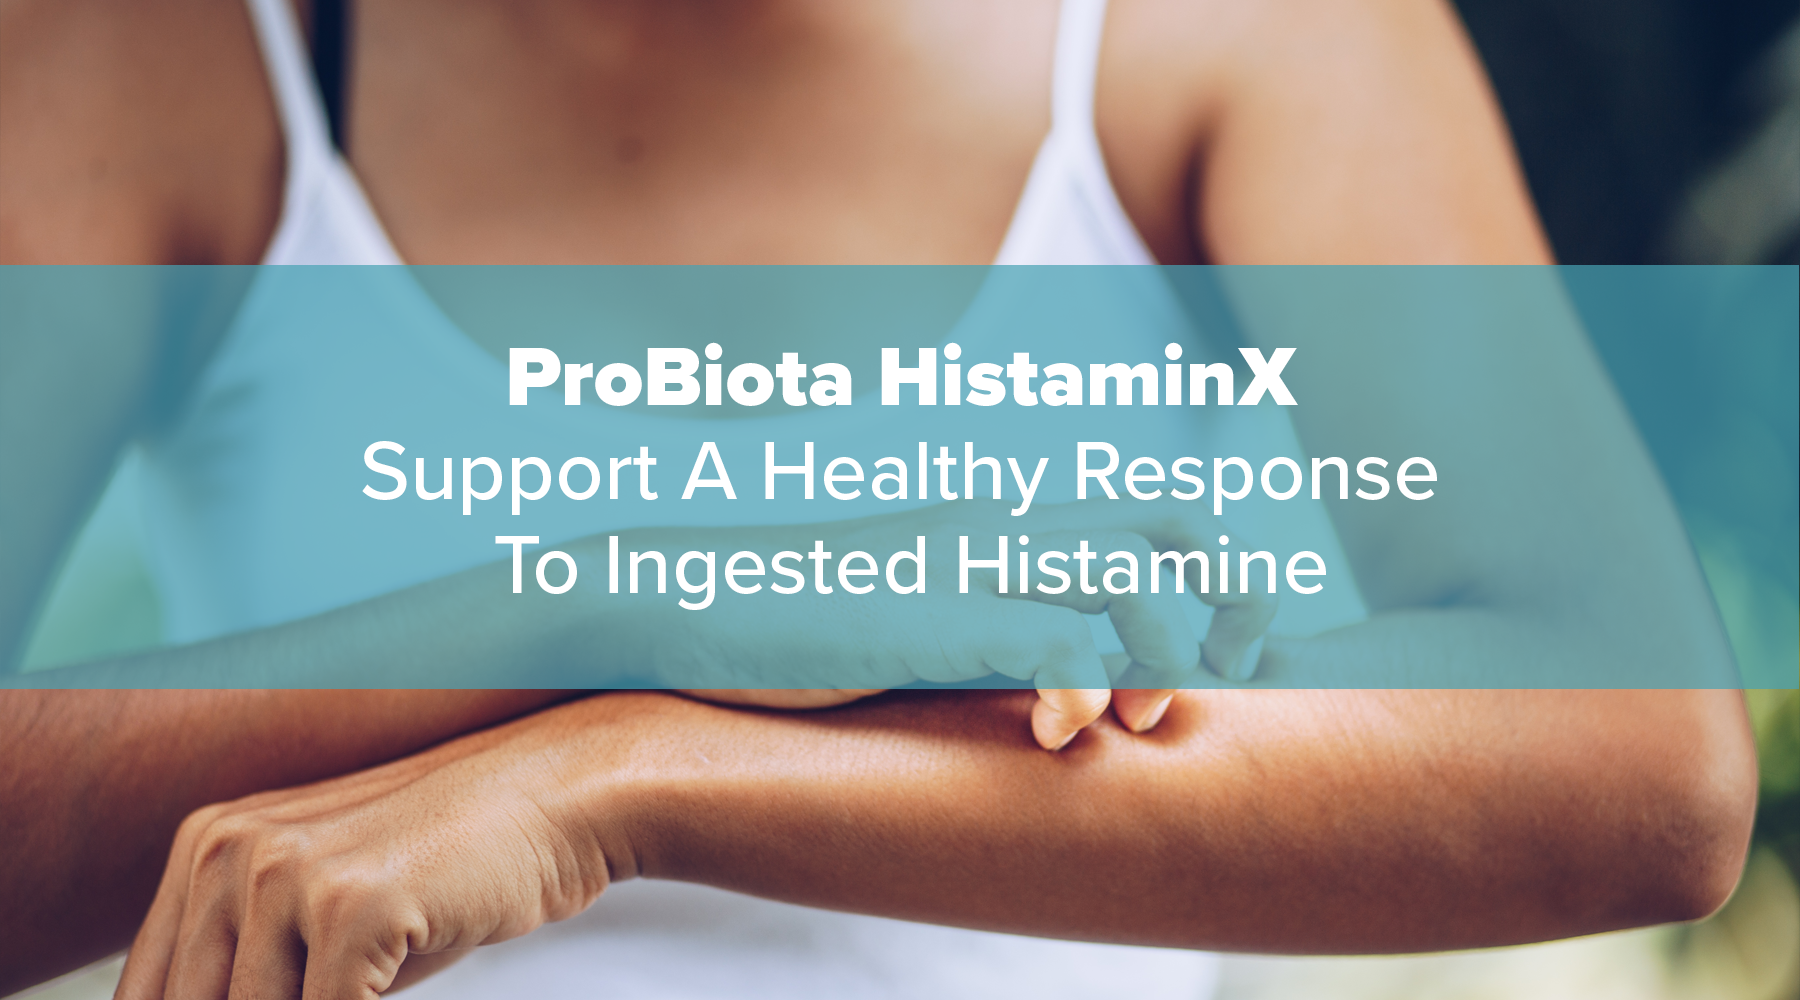 ProBiota HistaminX - Support A Healthy Response To Ingested Histamine